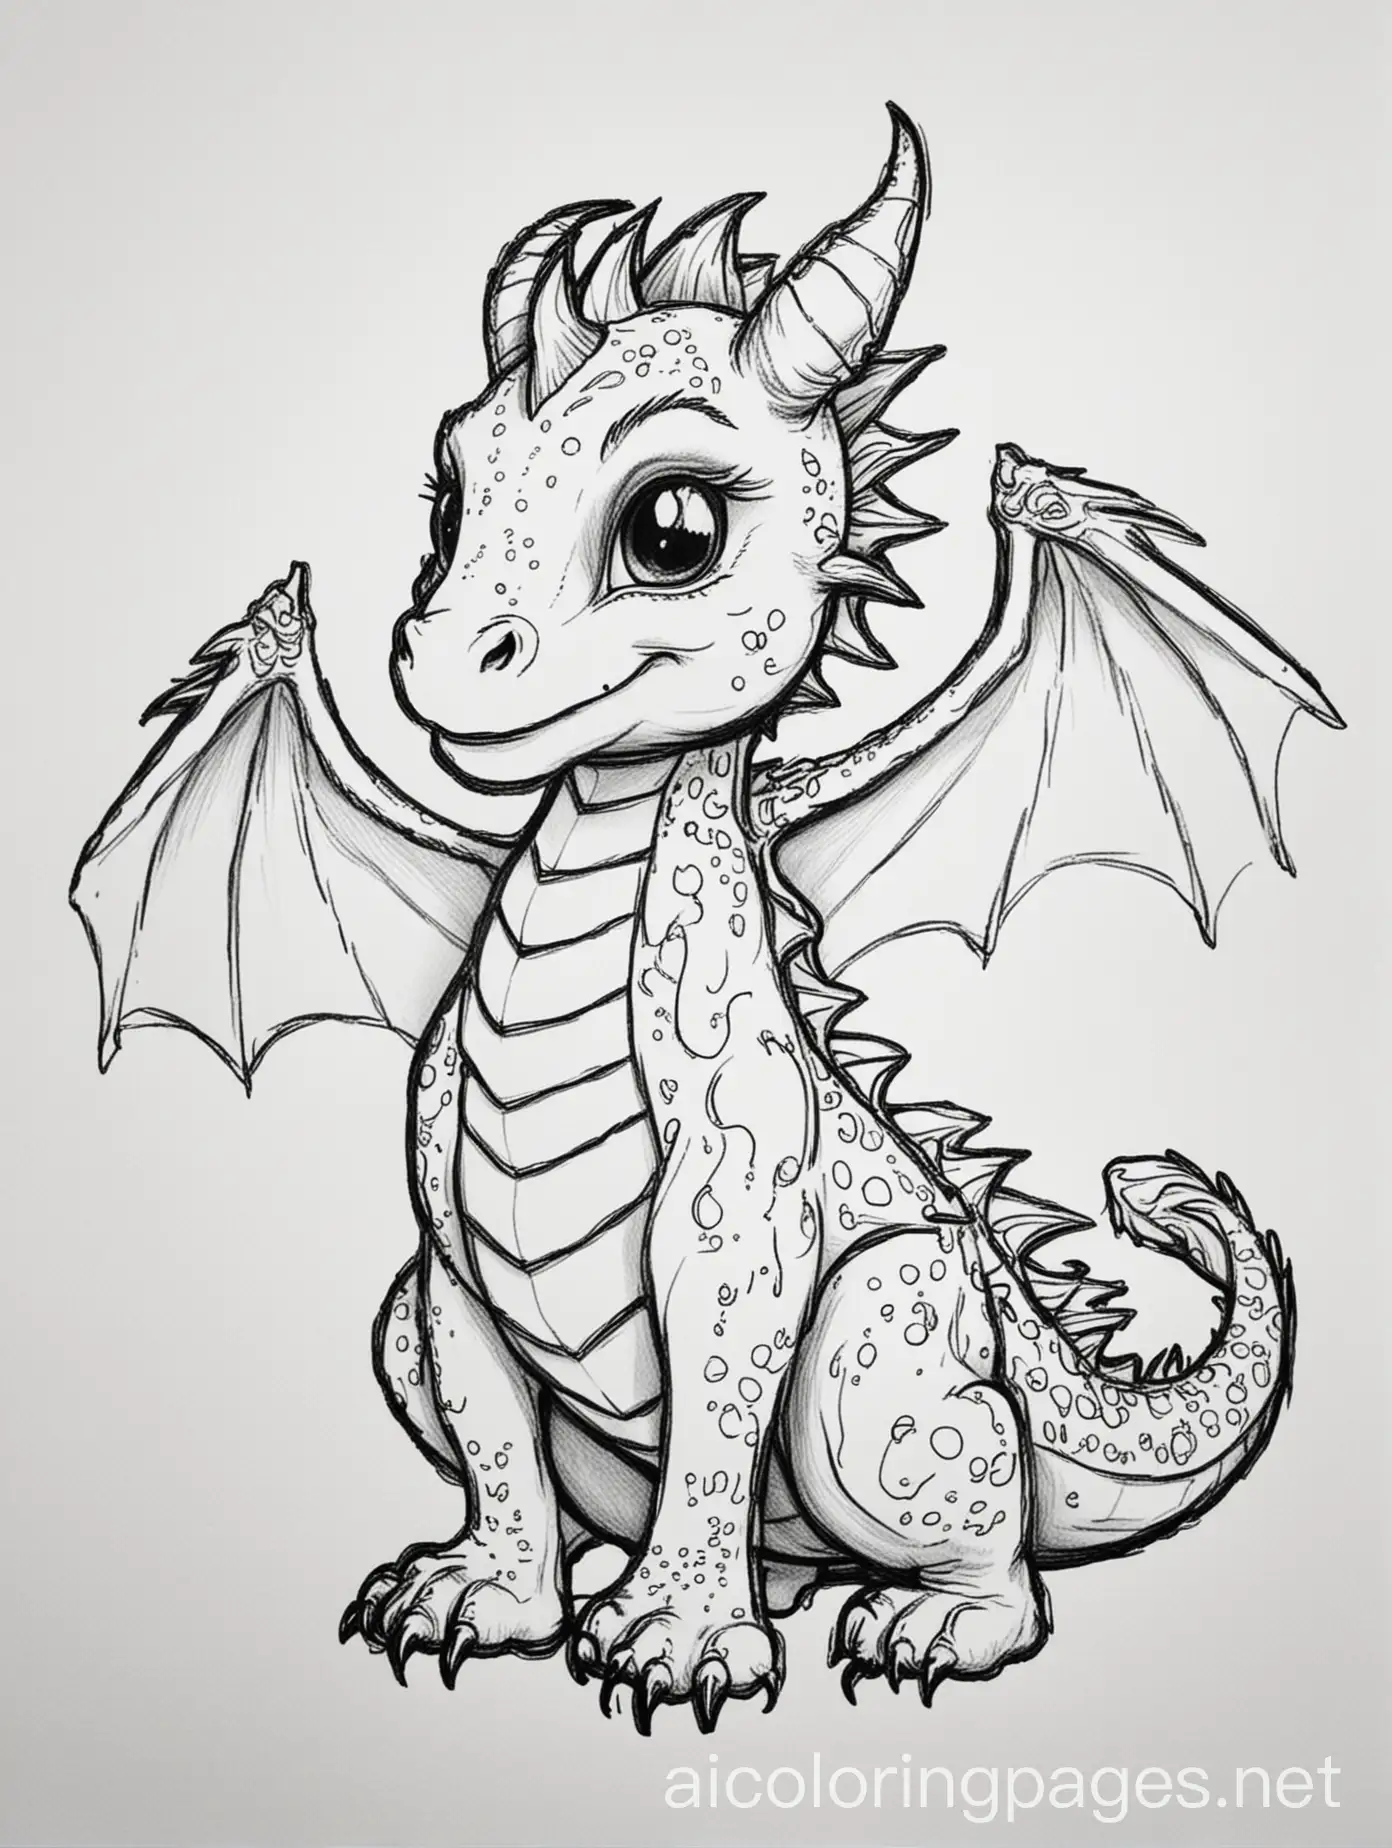 Dragon-Coloring-Page-for-Kids-Easy-to-Draw-Black-and-White-Line-Art